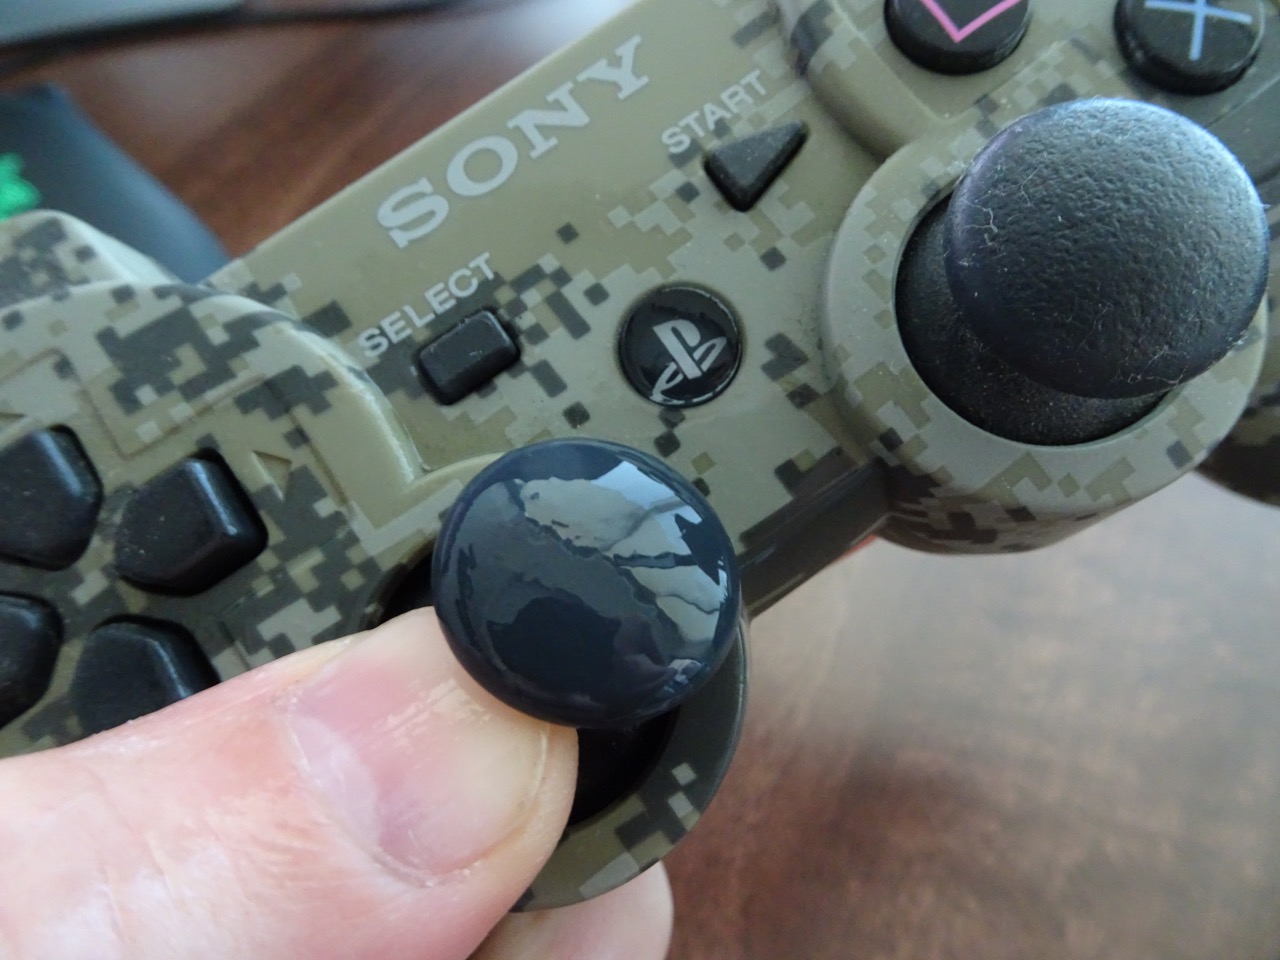 Cleaning The Sticky Playstation Controller Analogue Thumb Sticks Igor Kromin